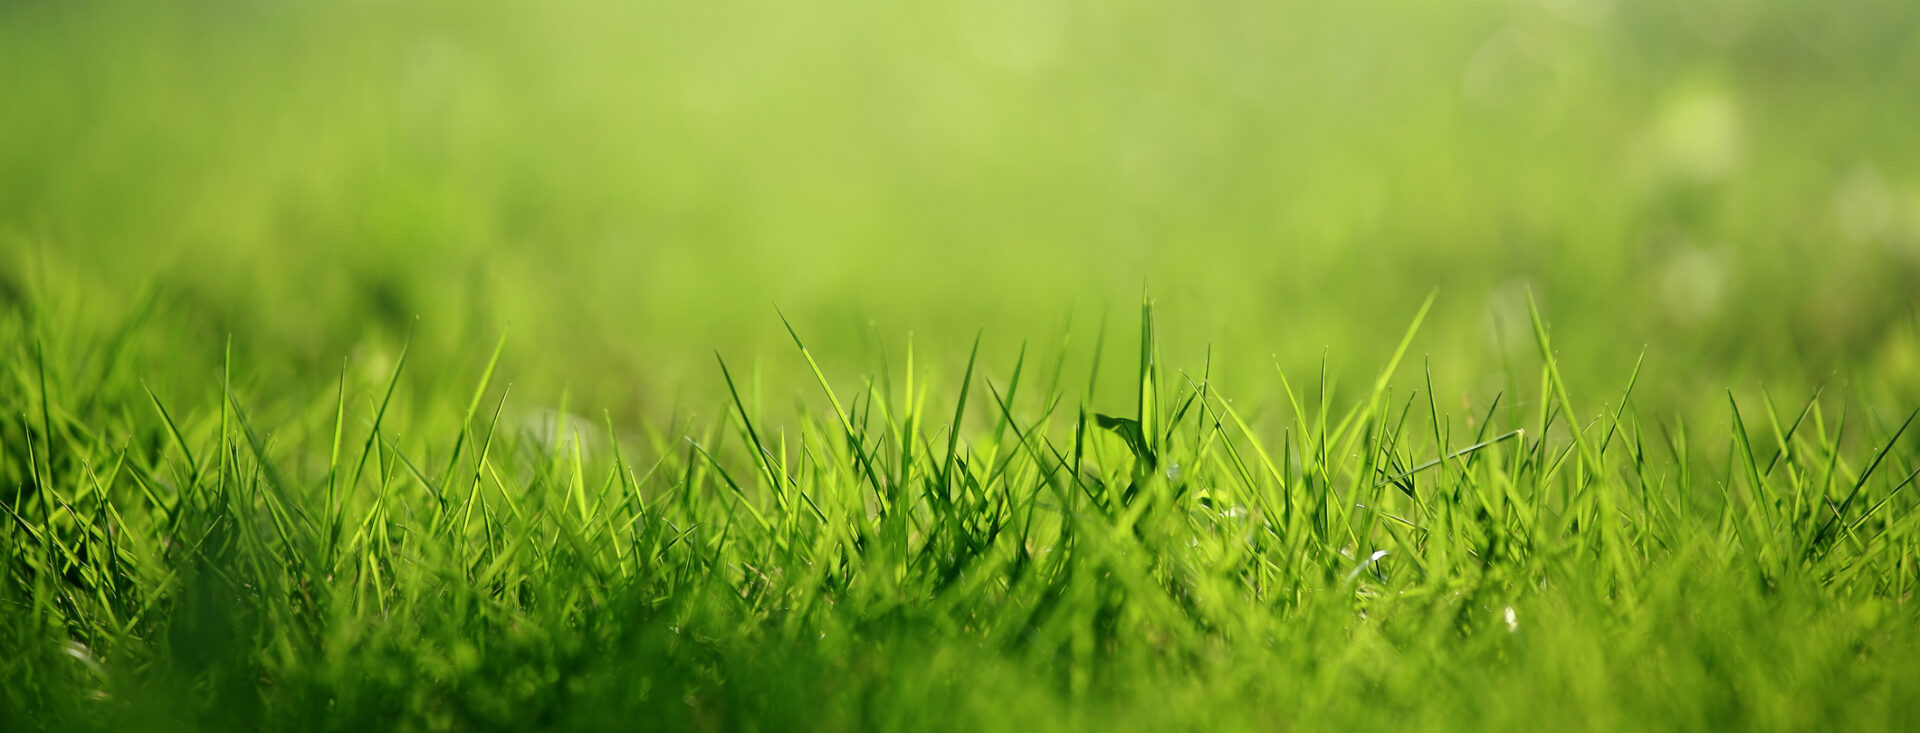 Lush green grass close-up with a shallow depth of field and a blurred background, bathed in soft sunlight, conveying a sense of freshness.